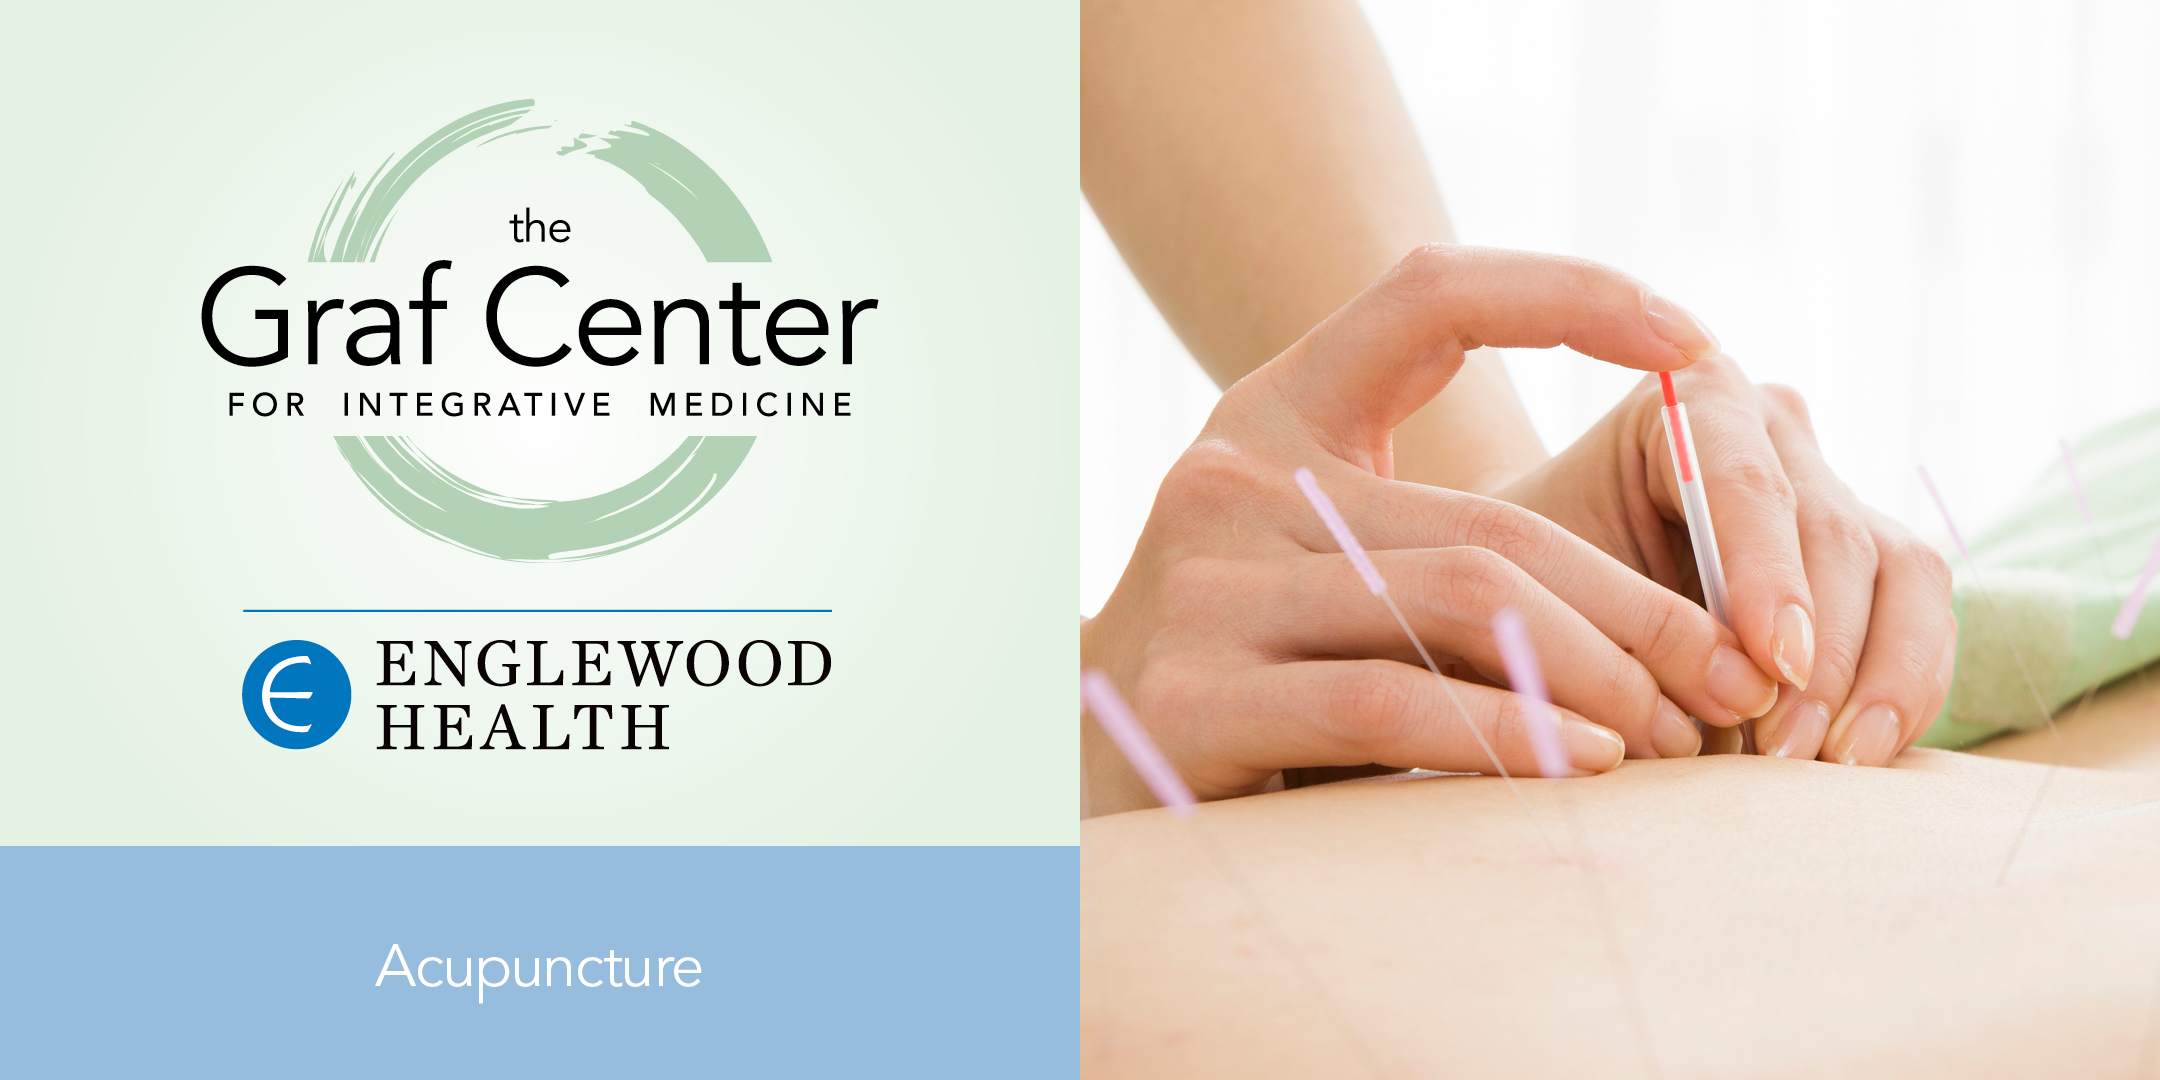 More info: Acupuncture for the Holidays: Stress Relief, Weight Loss, and Smoking Cessation